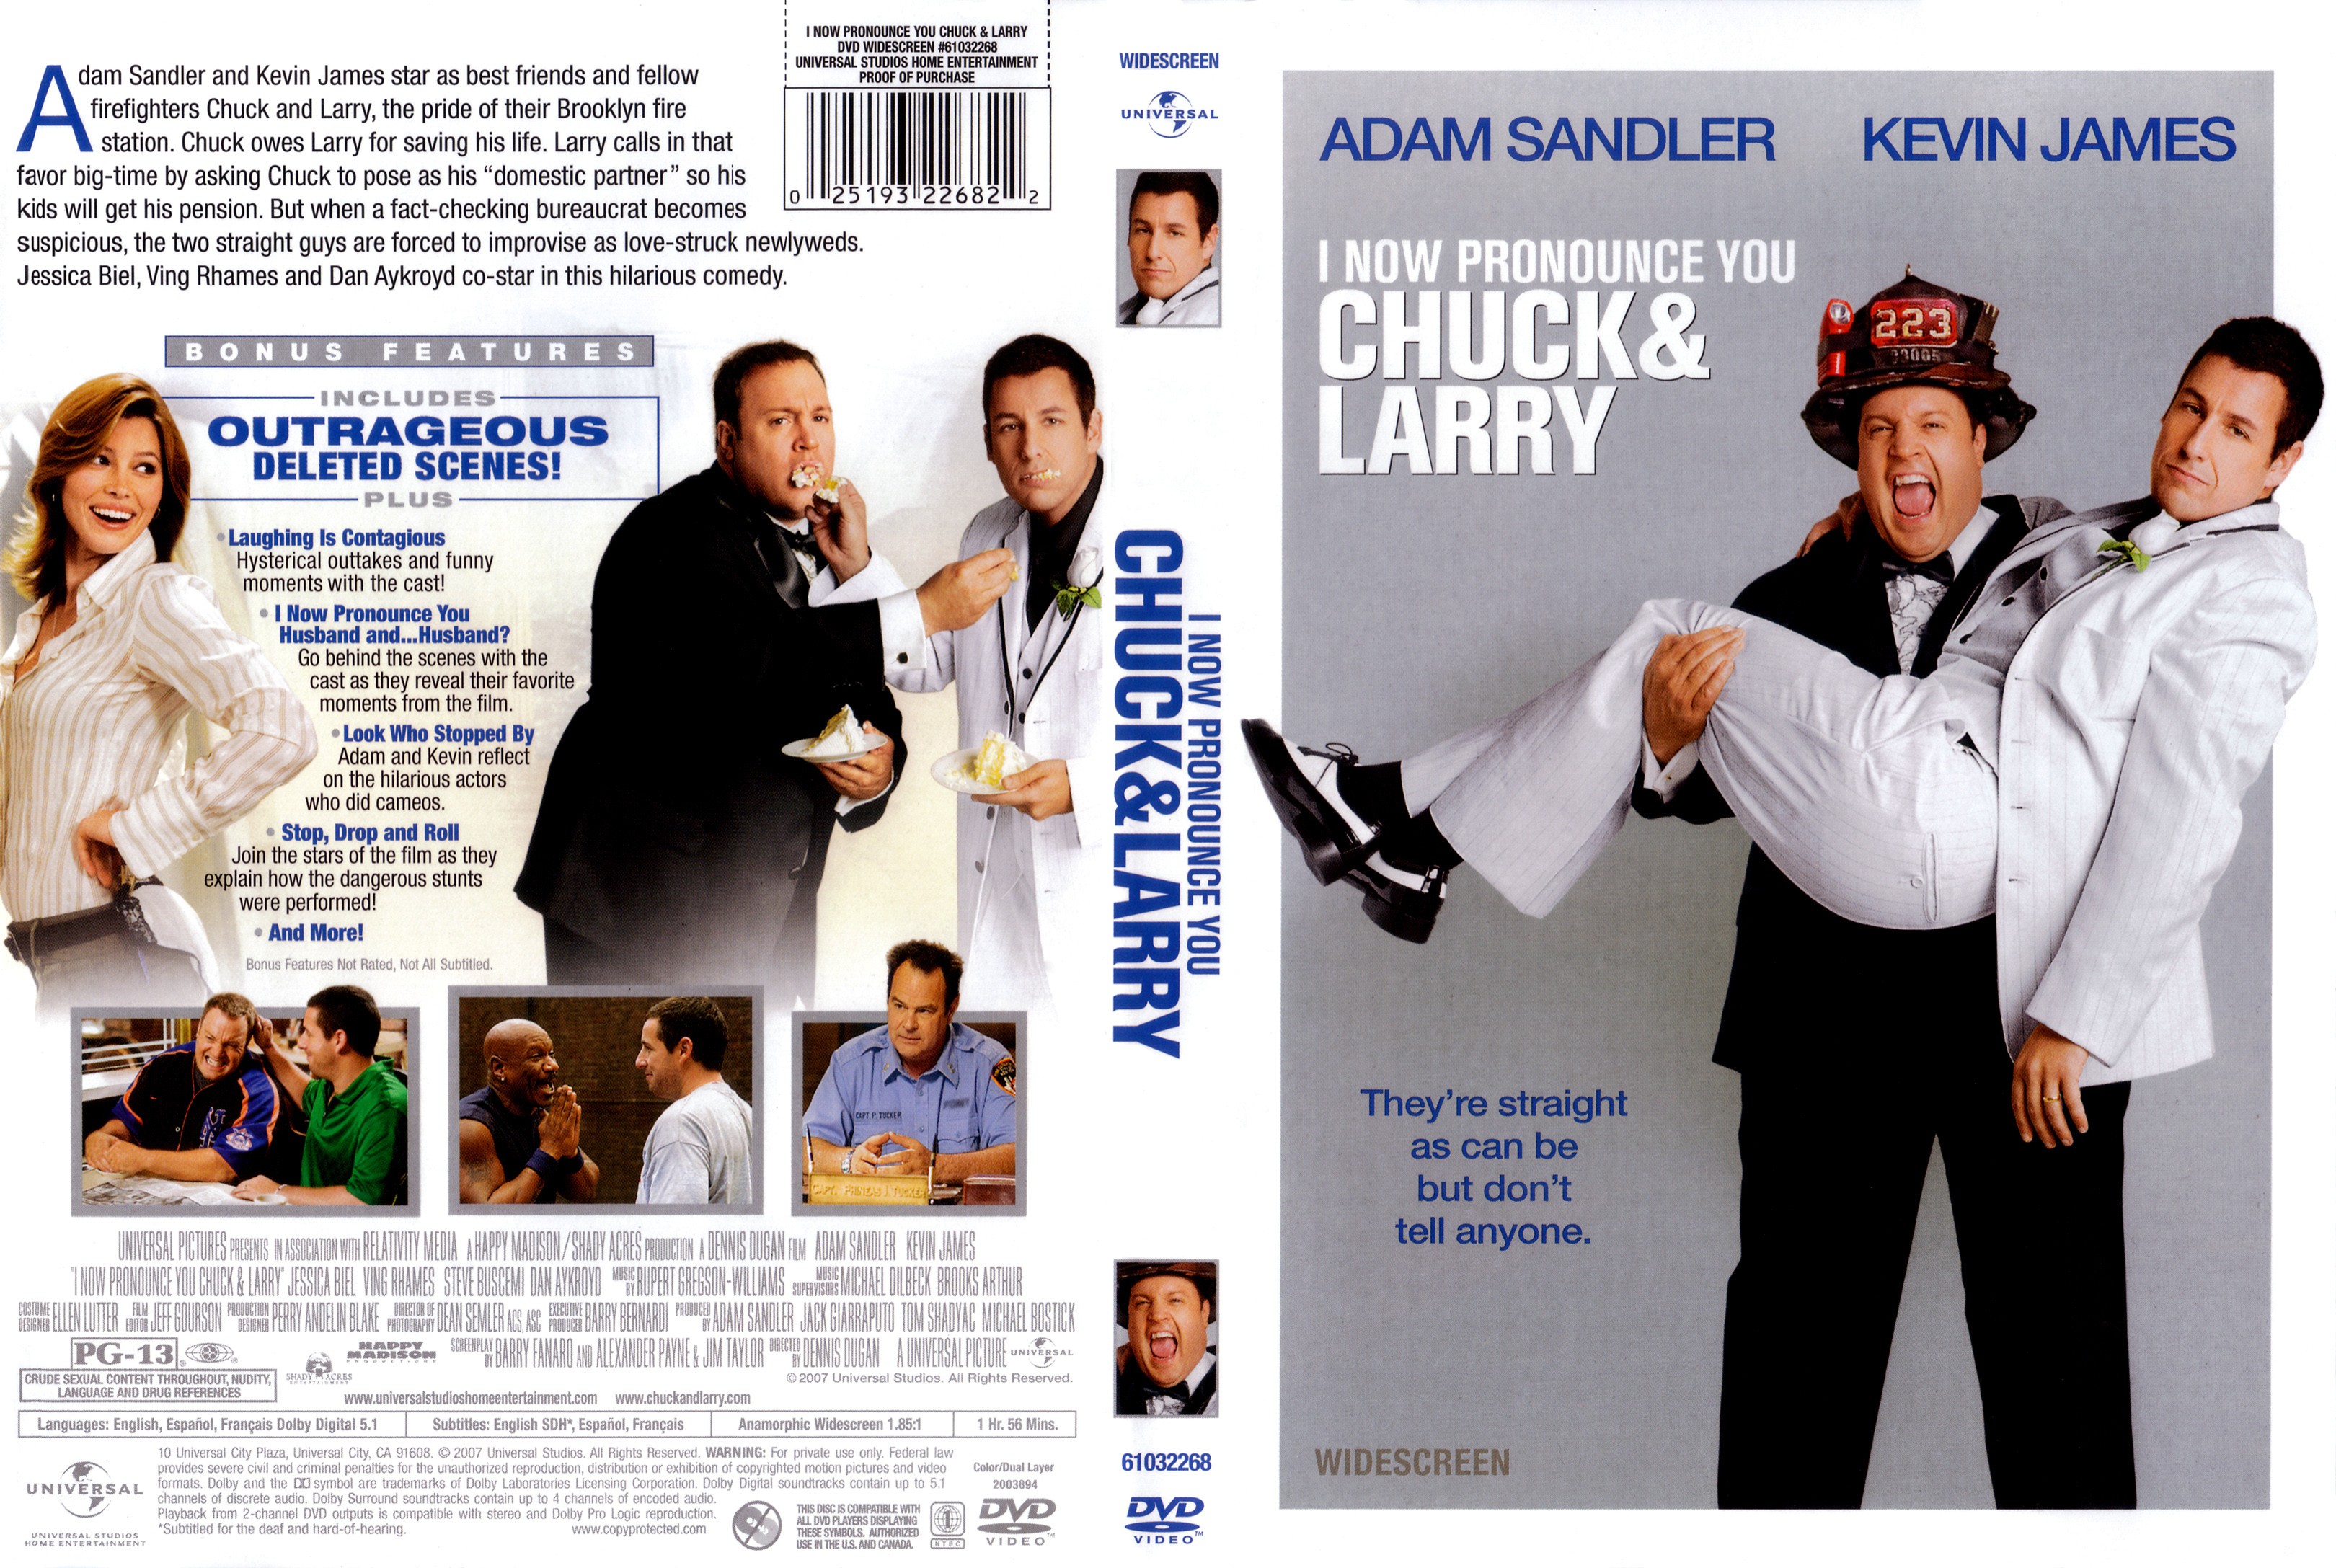 I Now Pronounce You Chuck & Larry - front back.